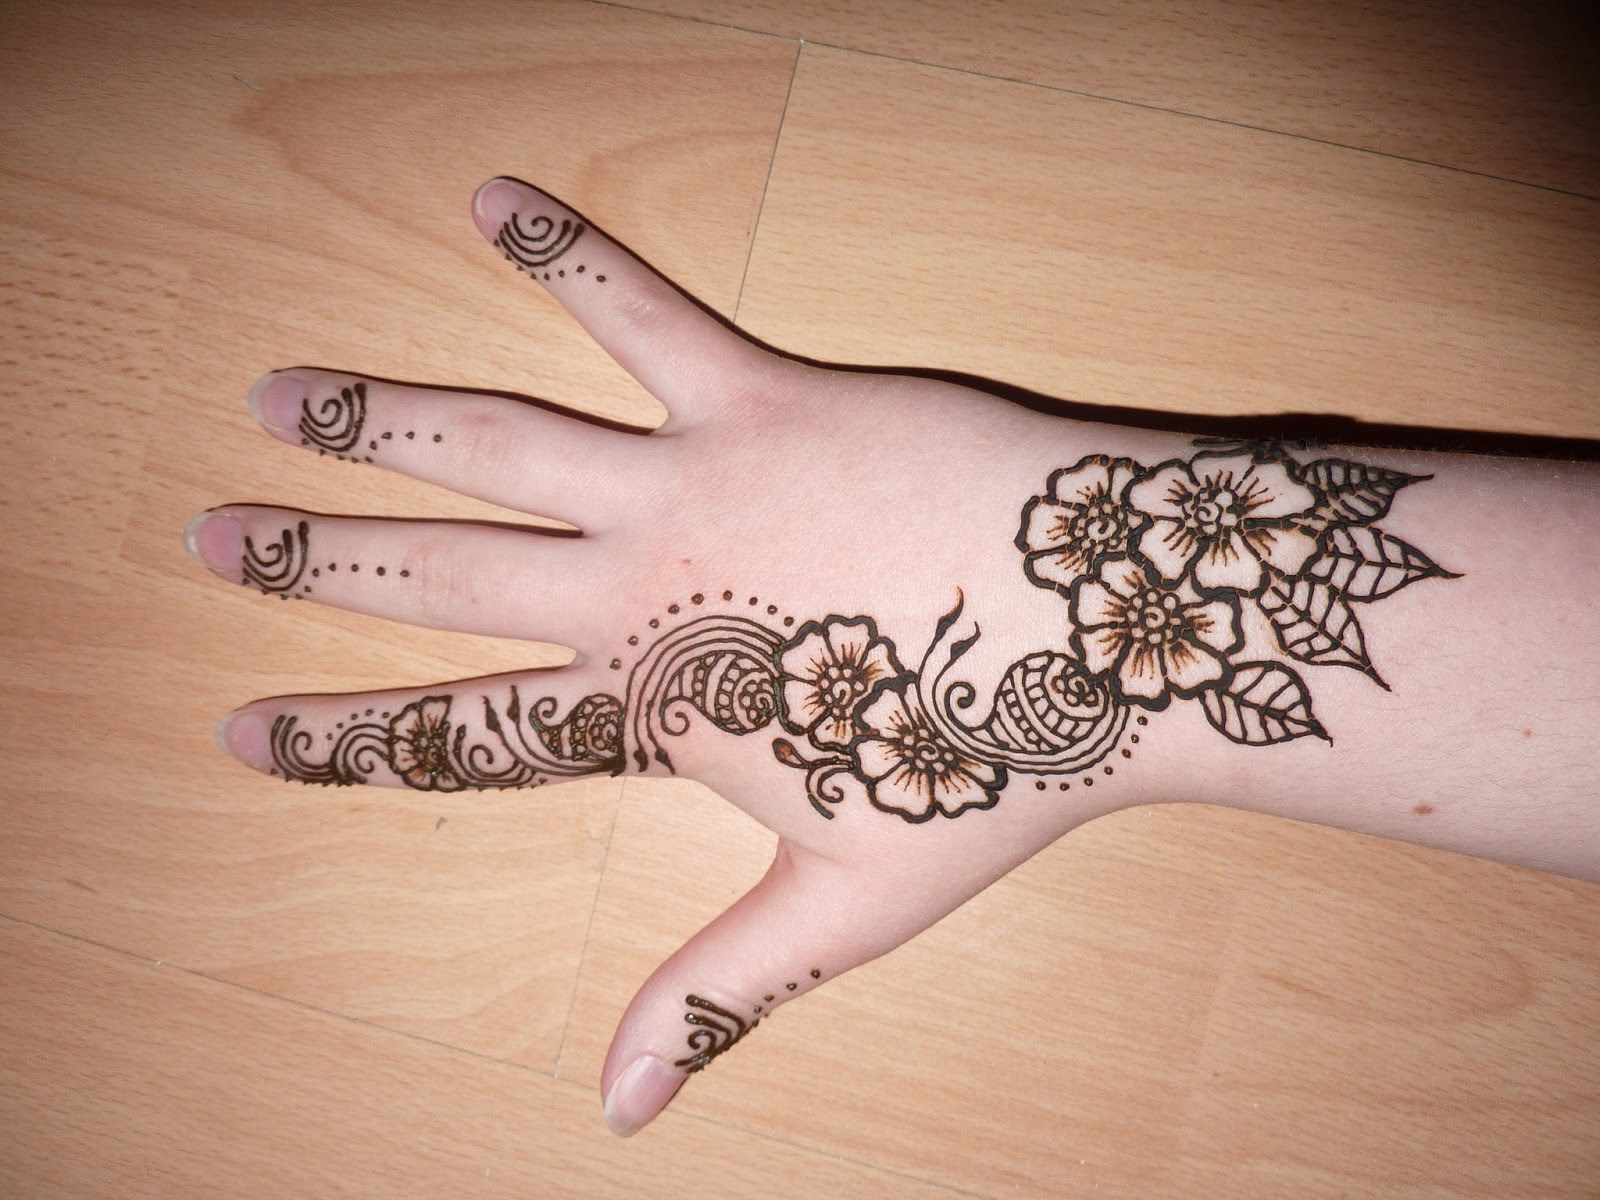 Henna Designs for Hand #10 ~ All What Veiled Woman need كل ما تحتاجه ...